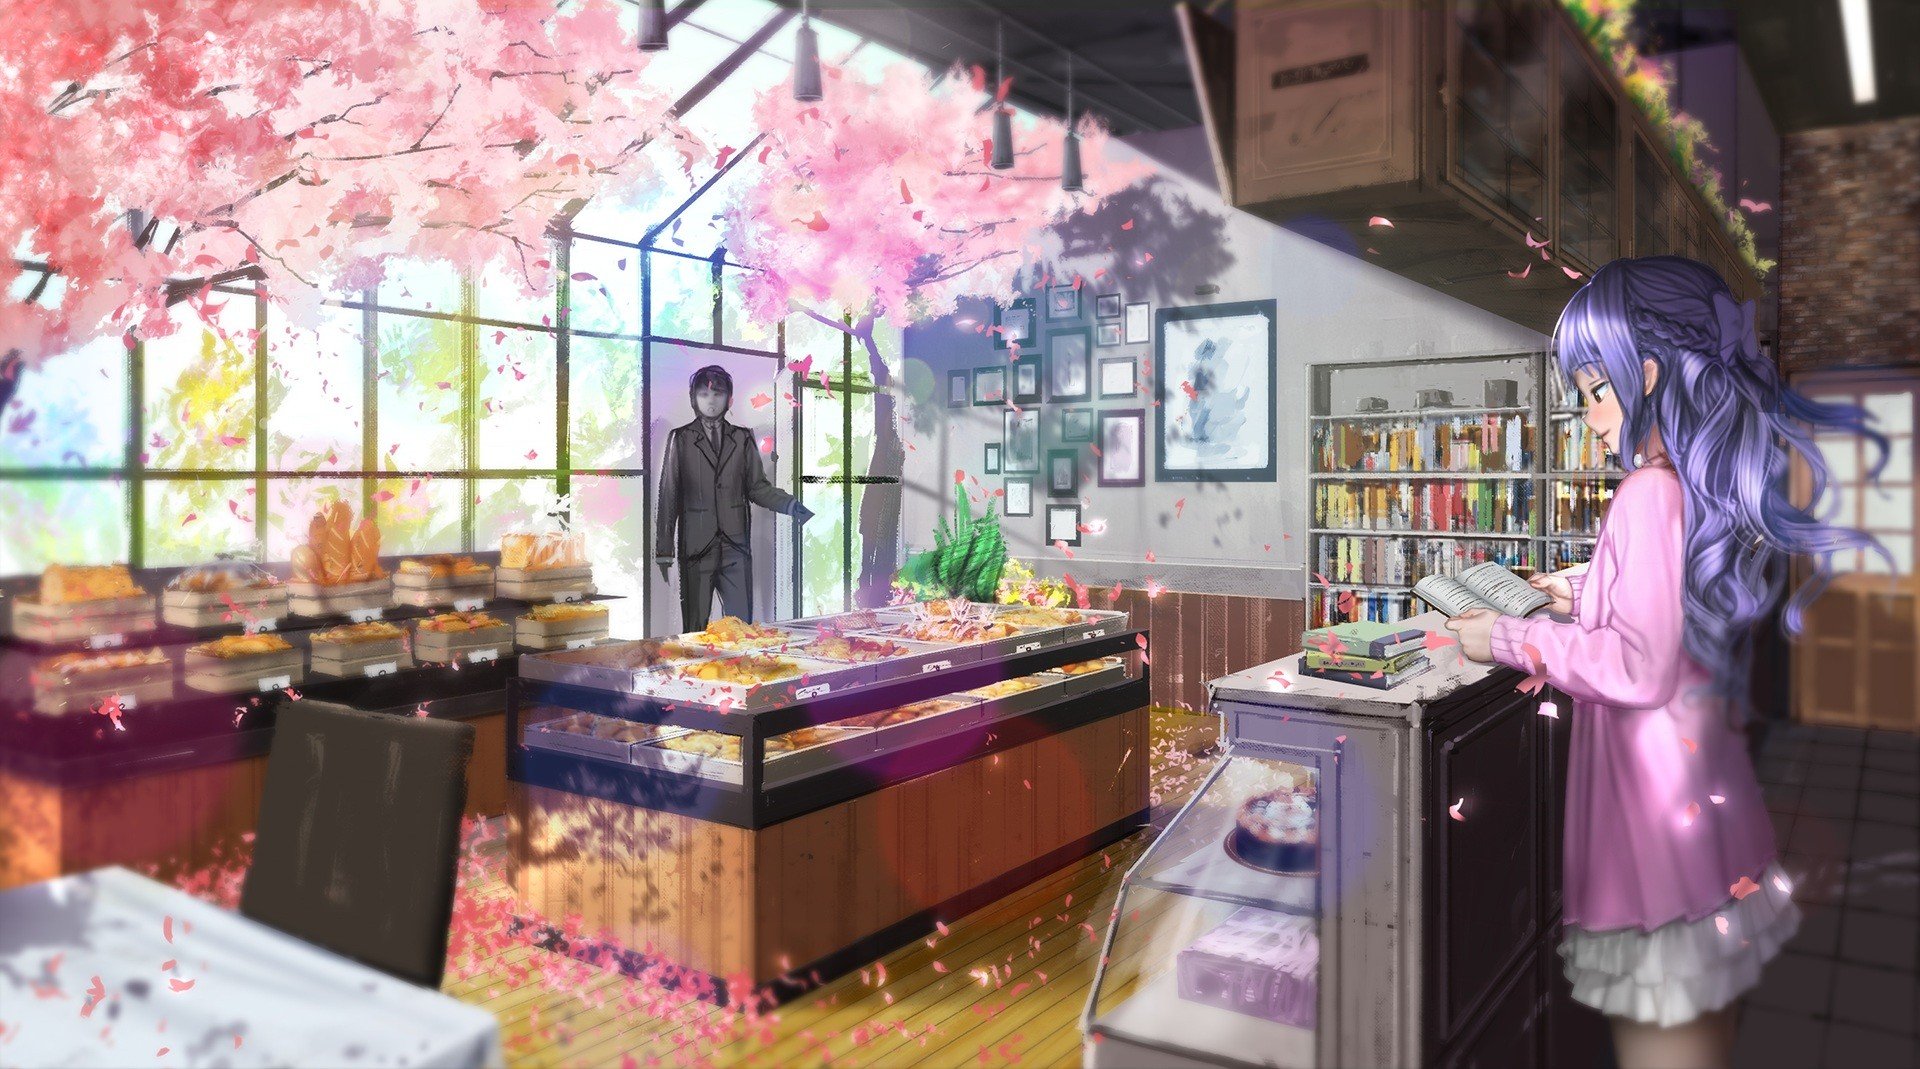 cherry blossom, Cakes, Original characters Wallpaper